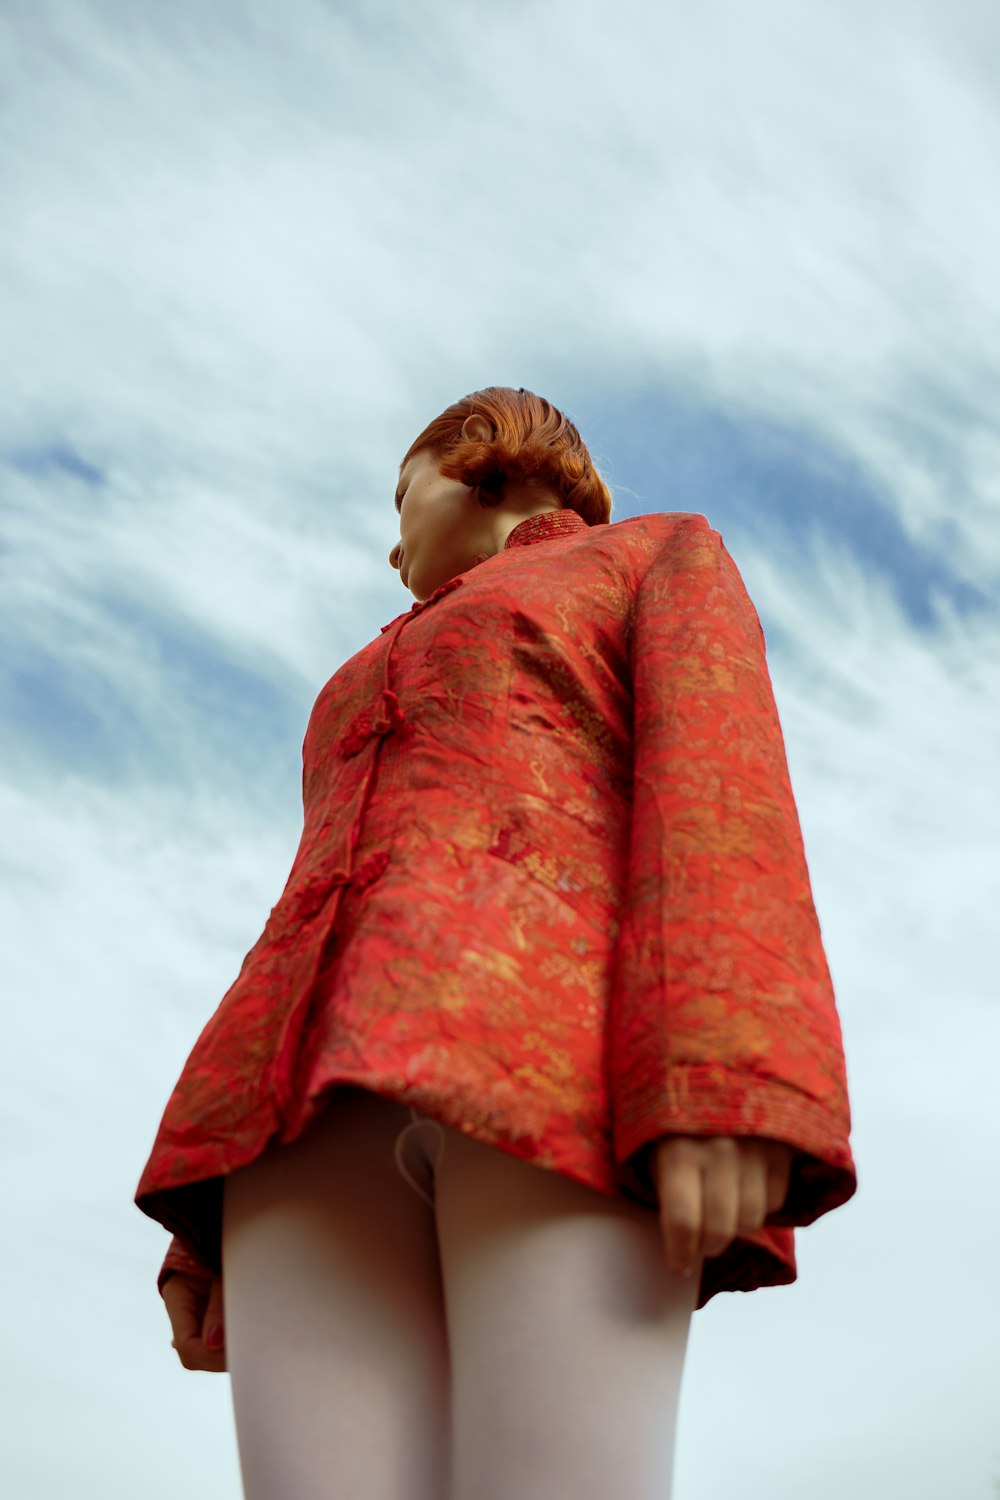 a statue of a woman in a red dress